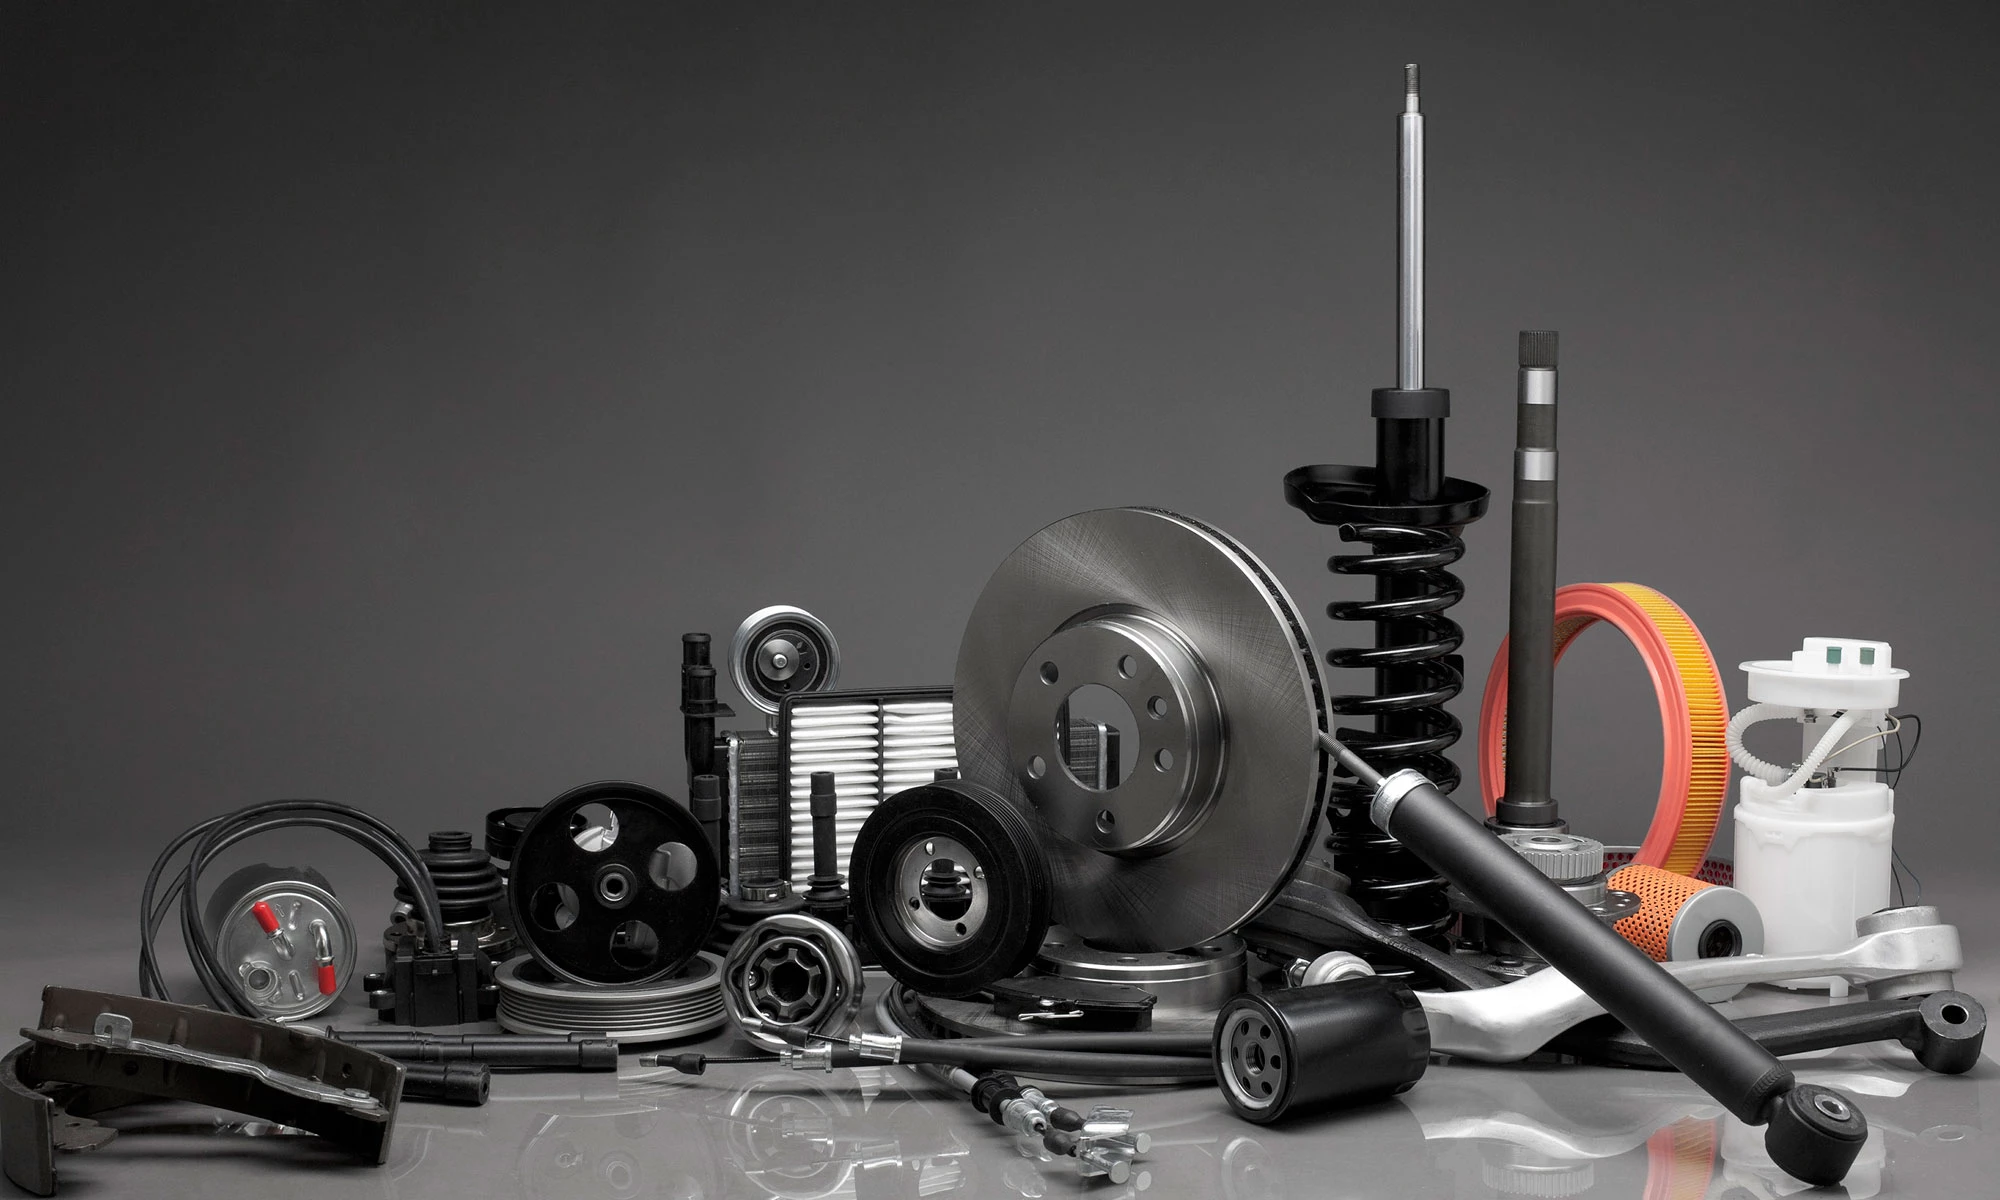 Automotive parts sales, central support for parts marketing to independent garages.